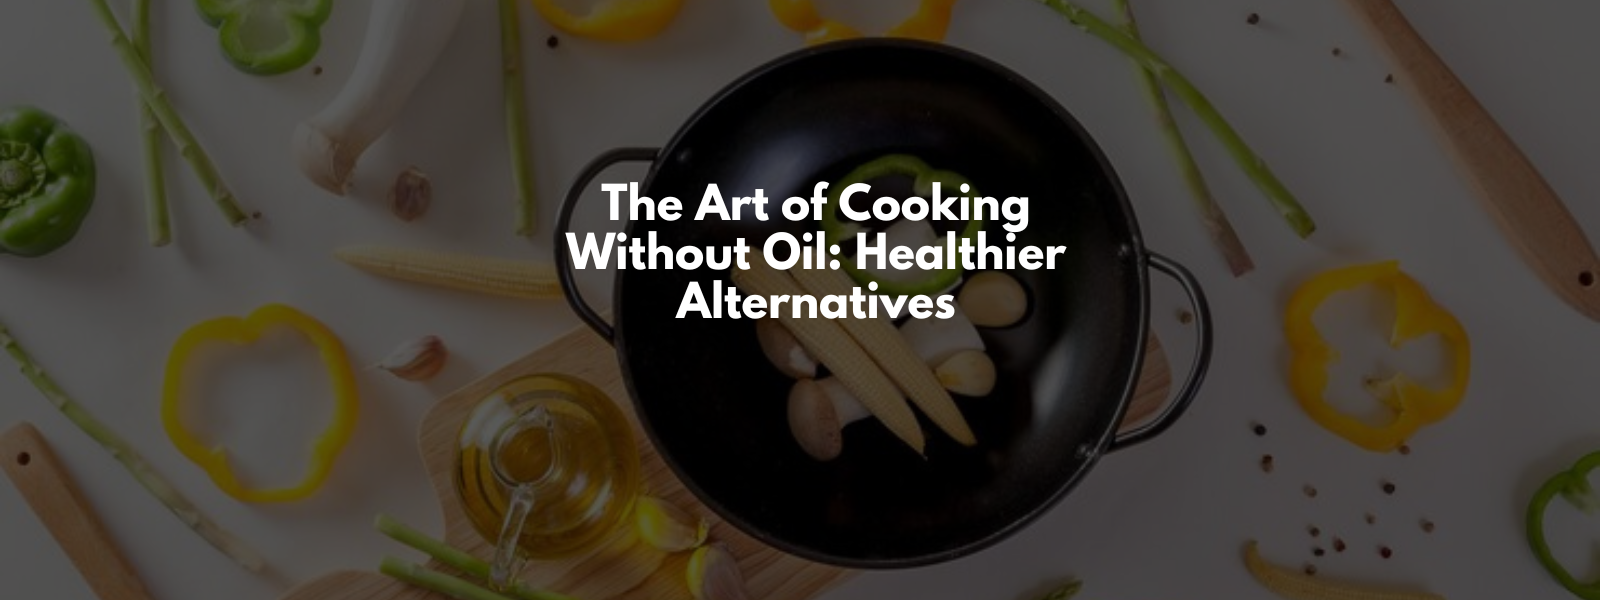 The Art of Cooking Without Oil: Healthier Alternatives